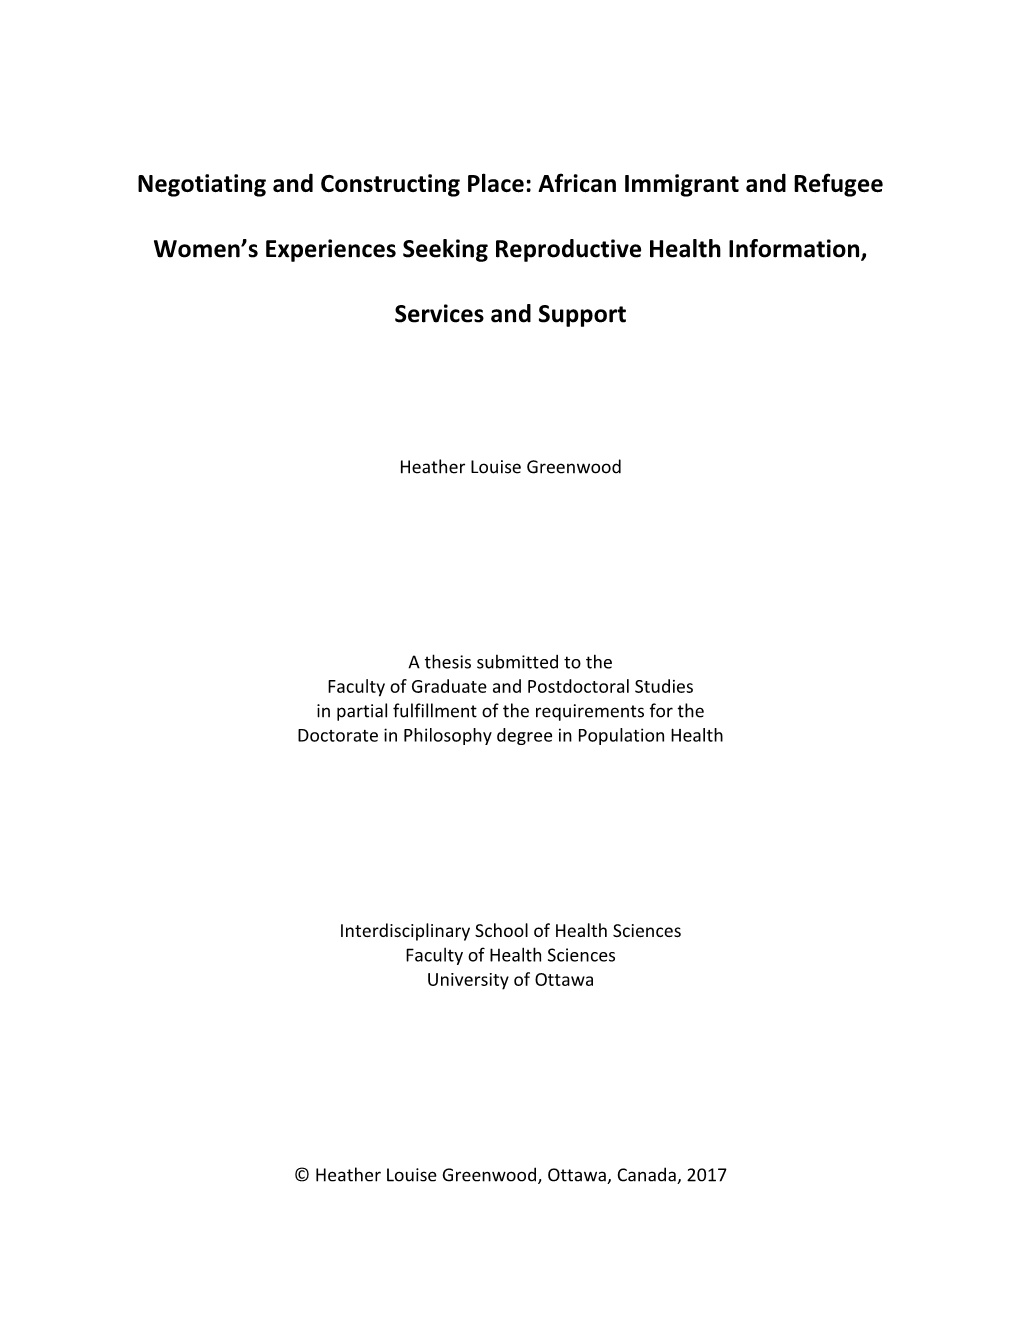 African Immigrant and Refugee Women's Experiences Seeking Reproductive Health Information, Services and Support